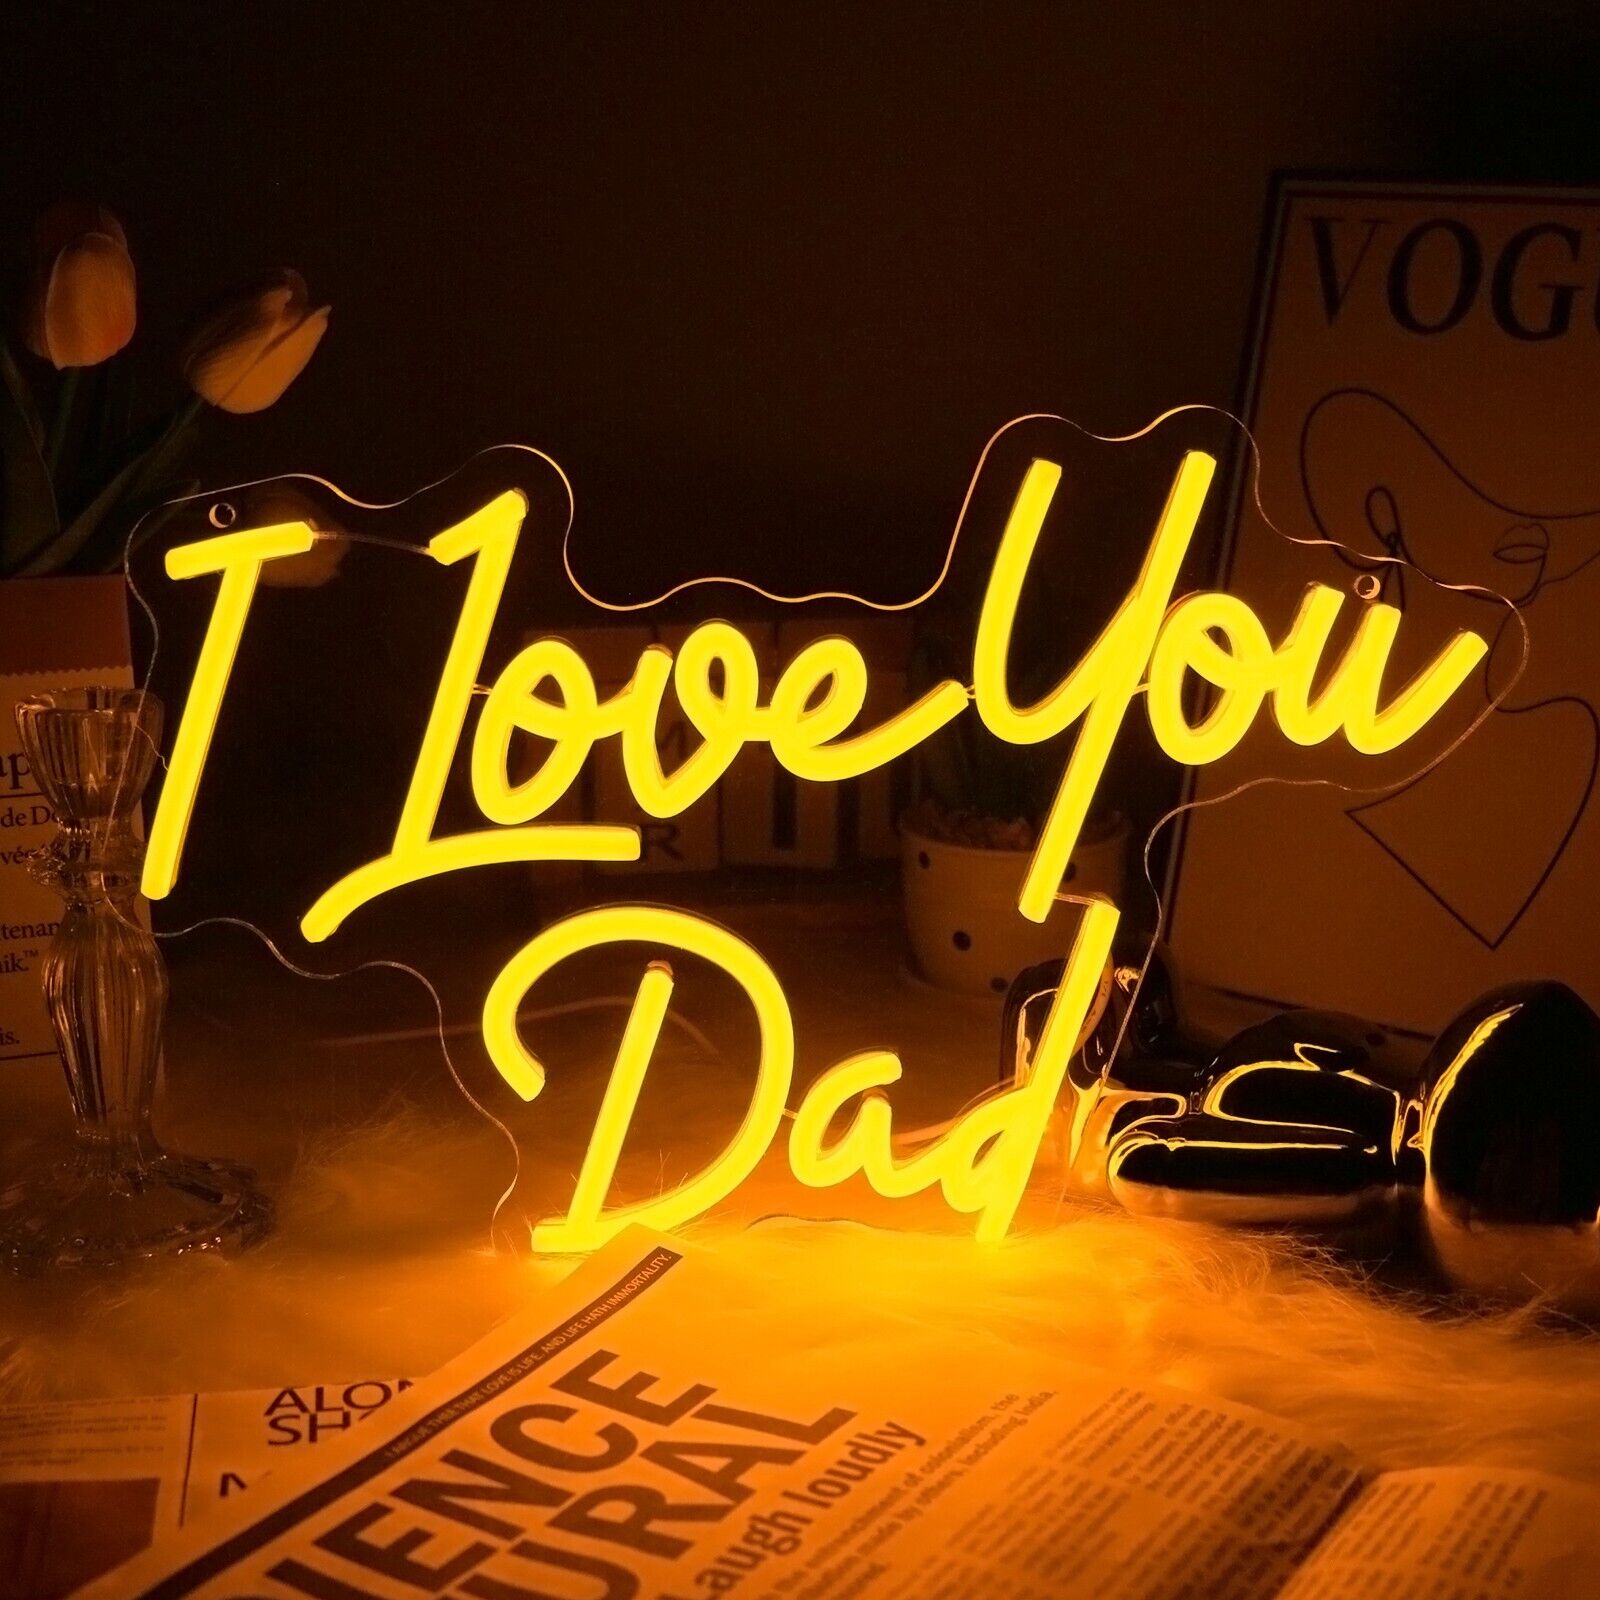 I Love You Dad Neon Sign, Idea Gift for Dad, Father's Day Birthday Gifts for Dad